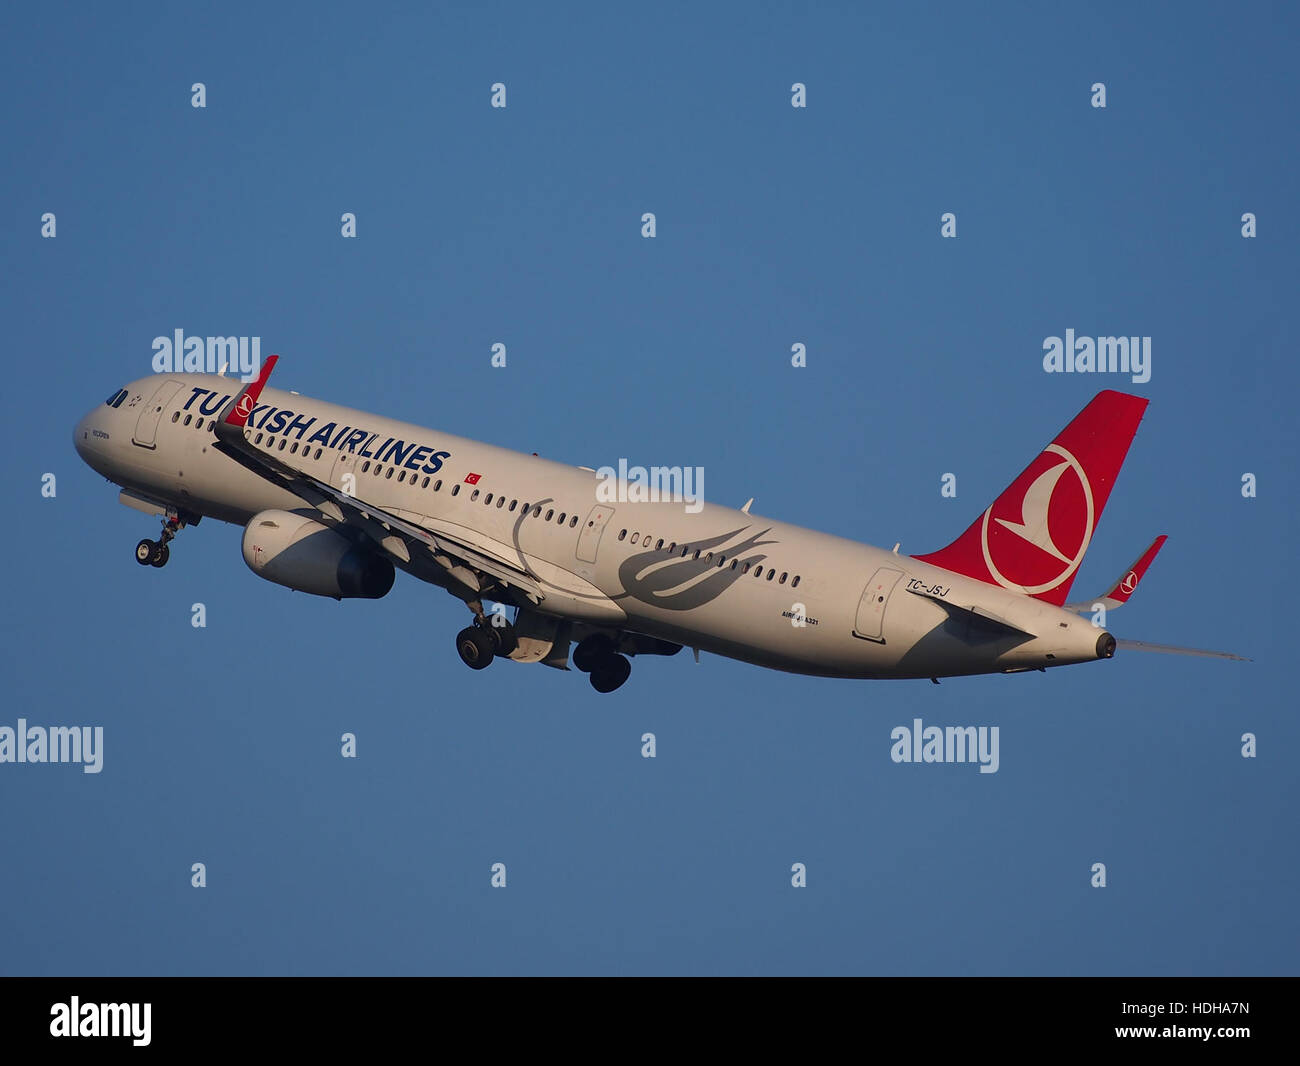 TC-JSJ Turkish Airlines Airbus A321-231(WL) takeoff from Schiphol runway 36C pic3 Stock Photo